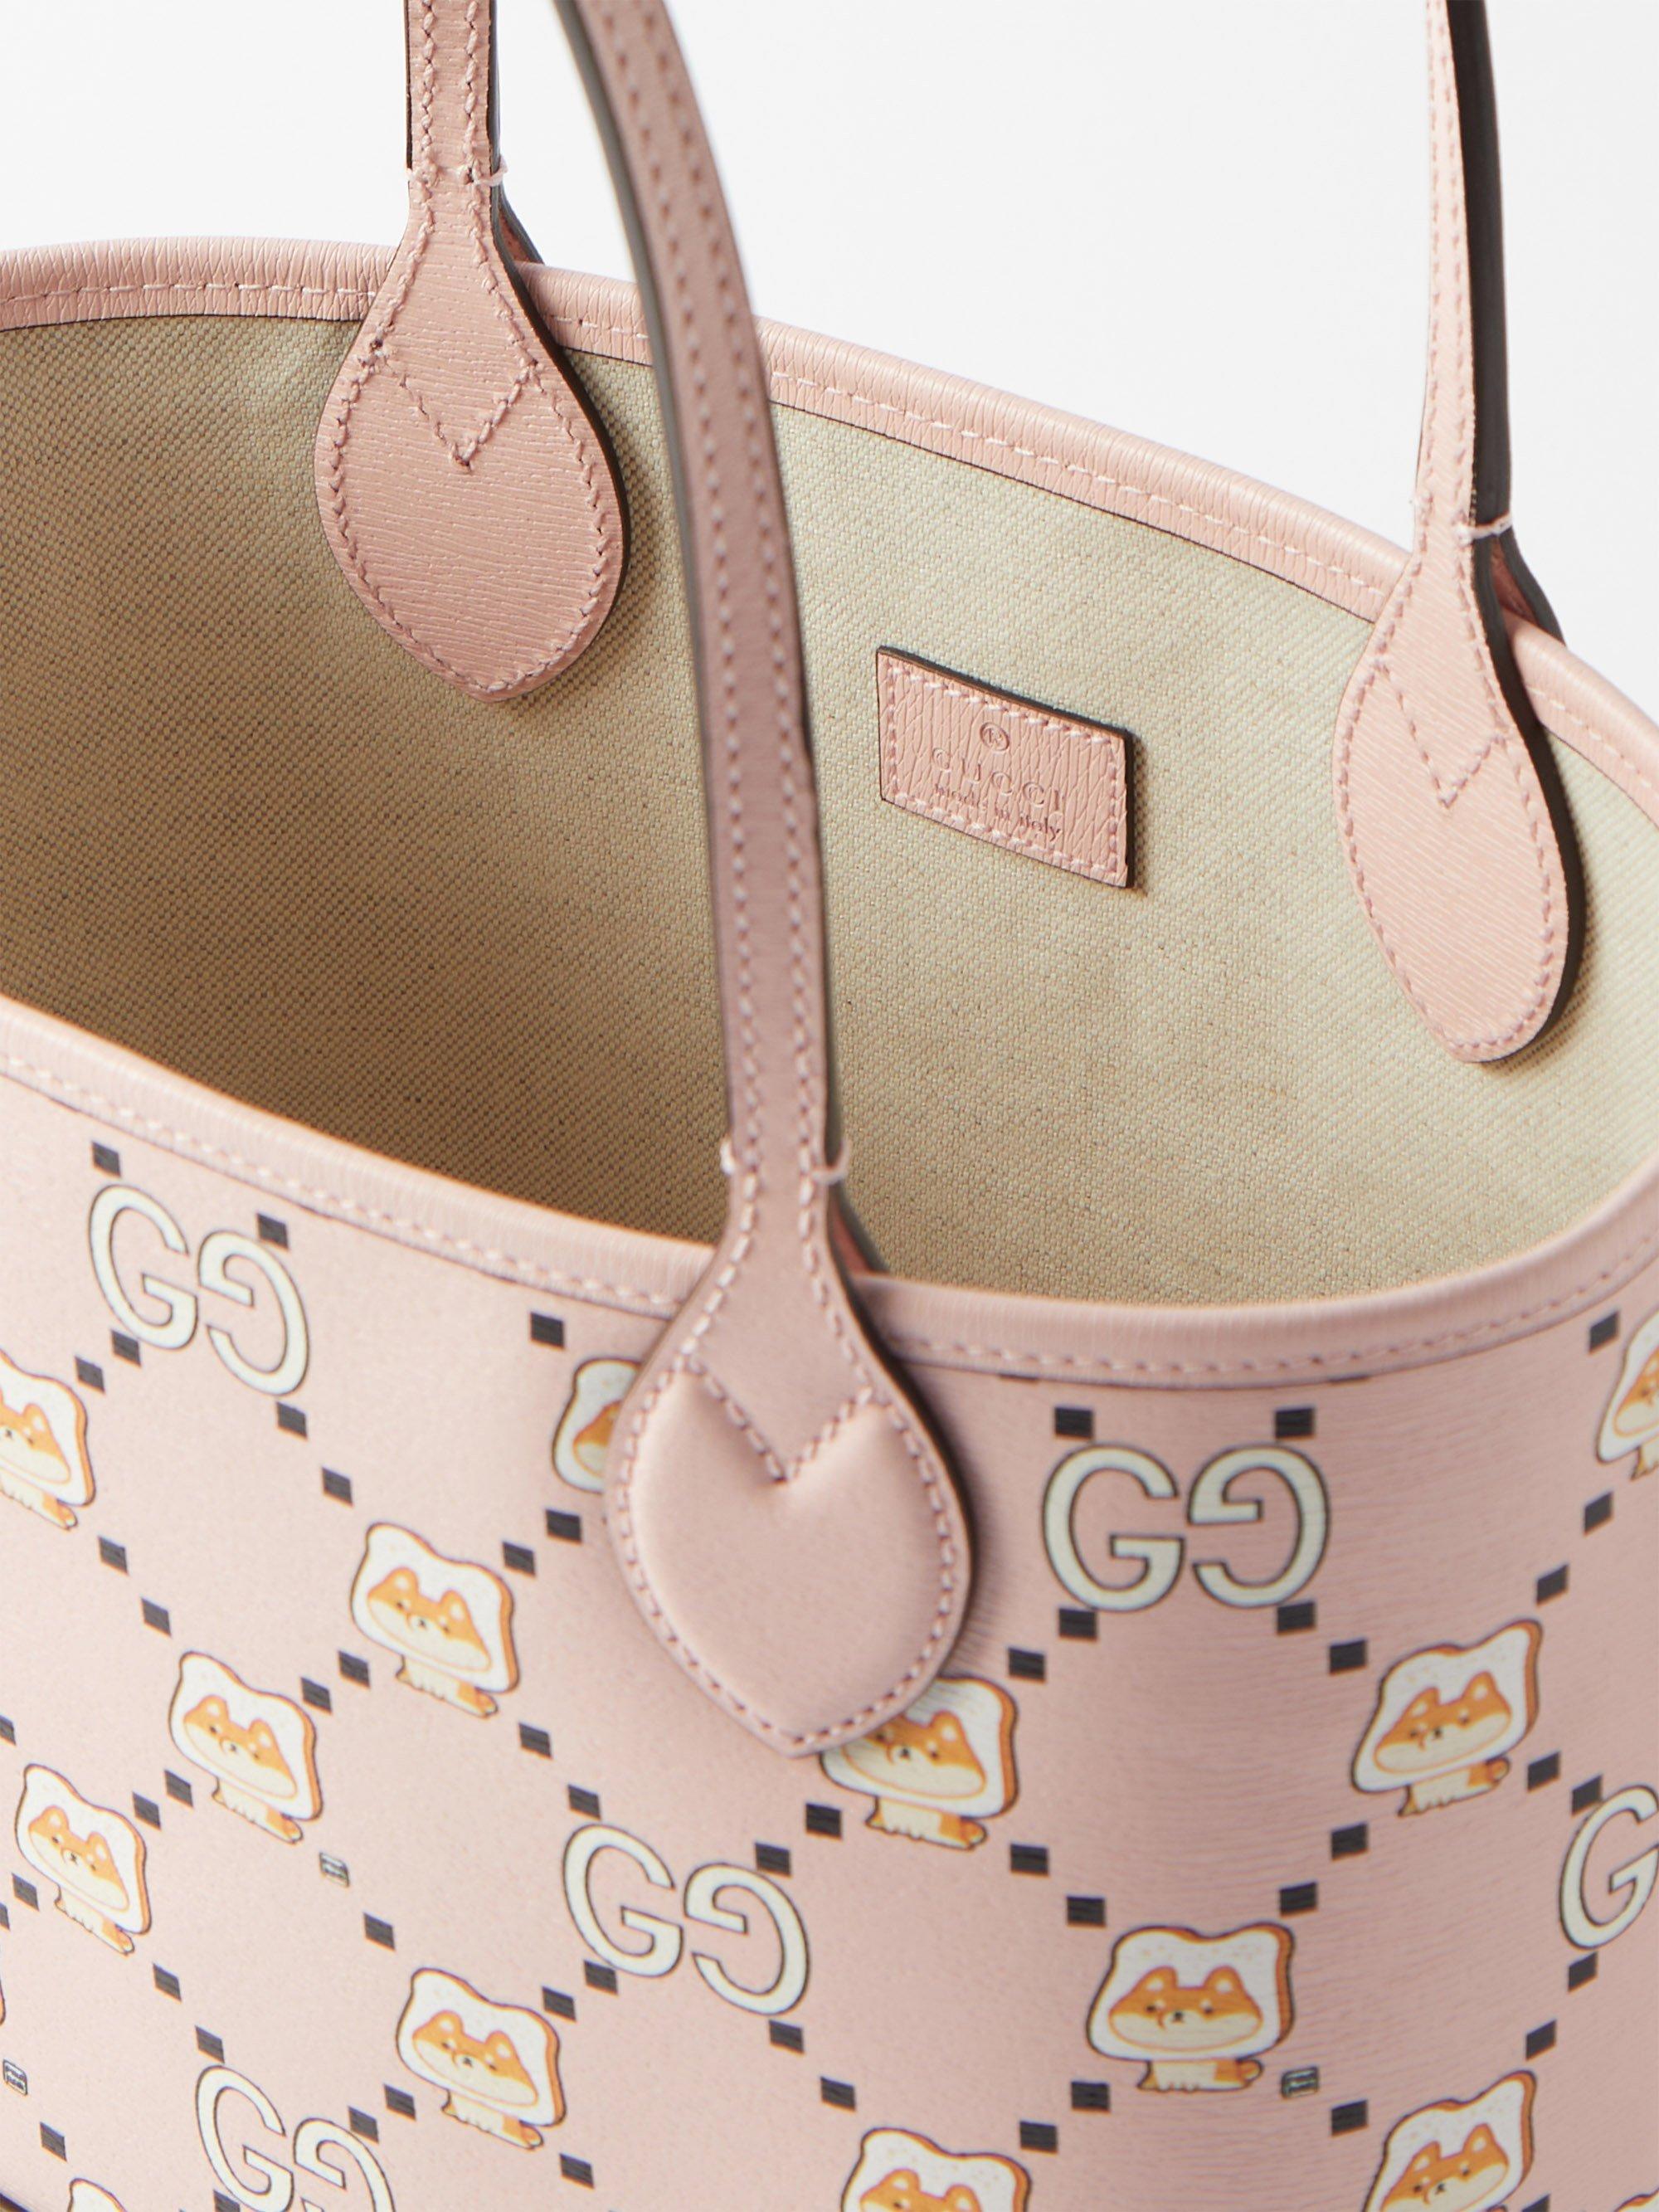 Gucci X Pikarar Printed Leather Tote Bag in Pink | Lyst